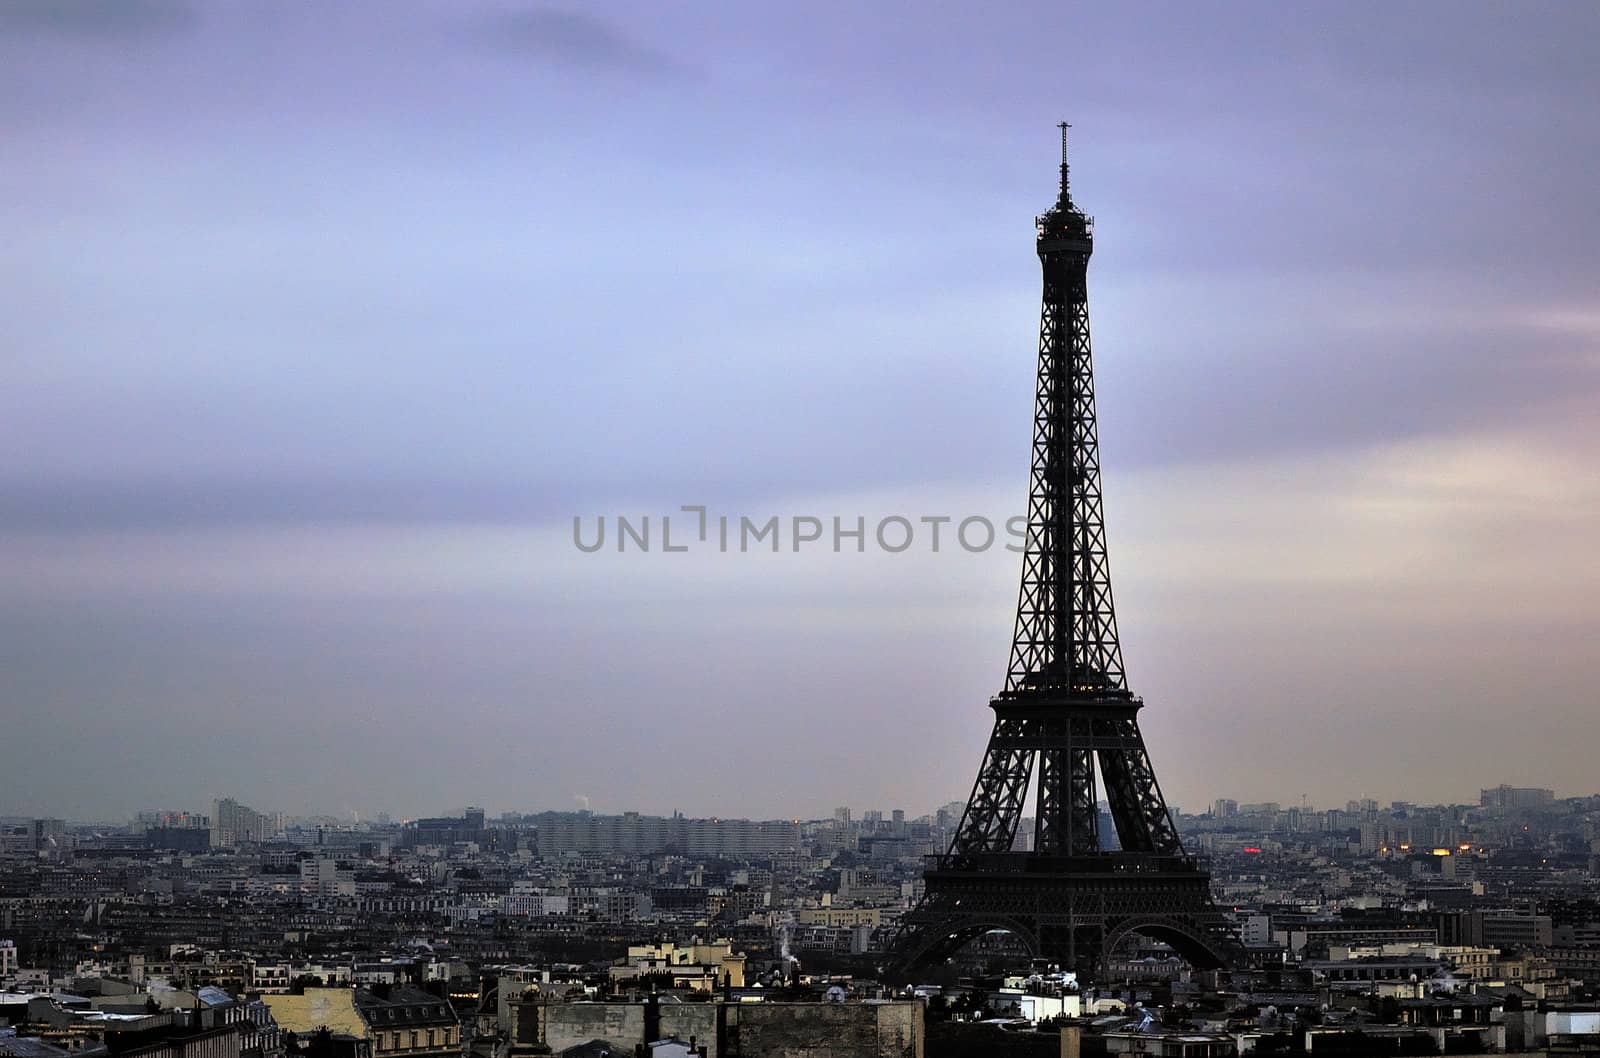  France Eiffel Tower. View of Paris during sunset.